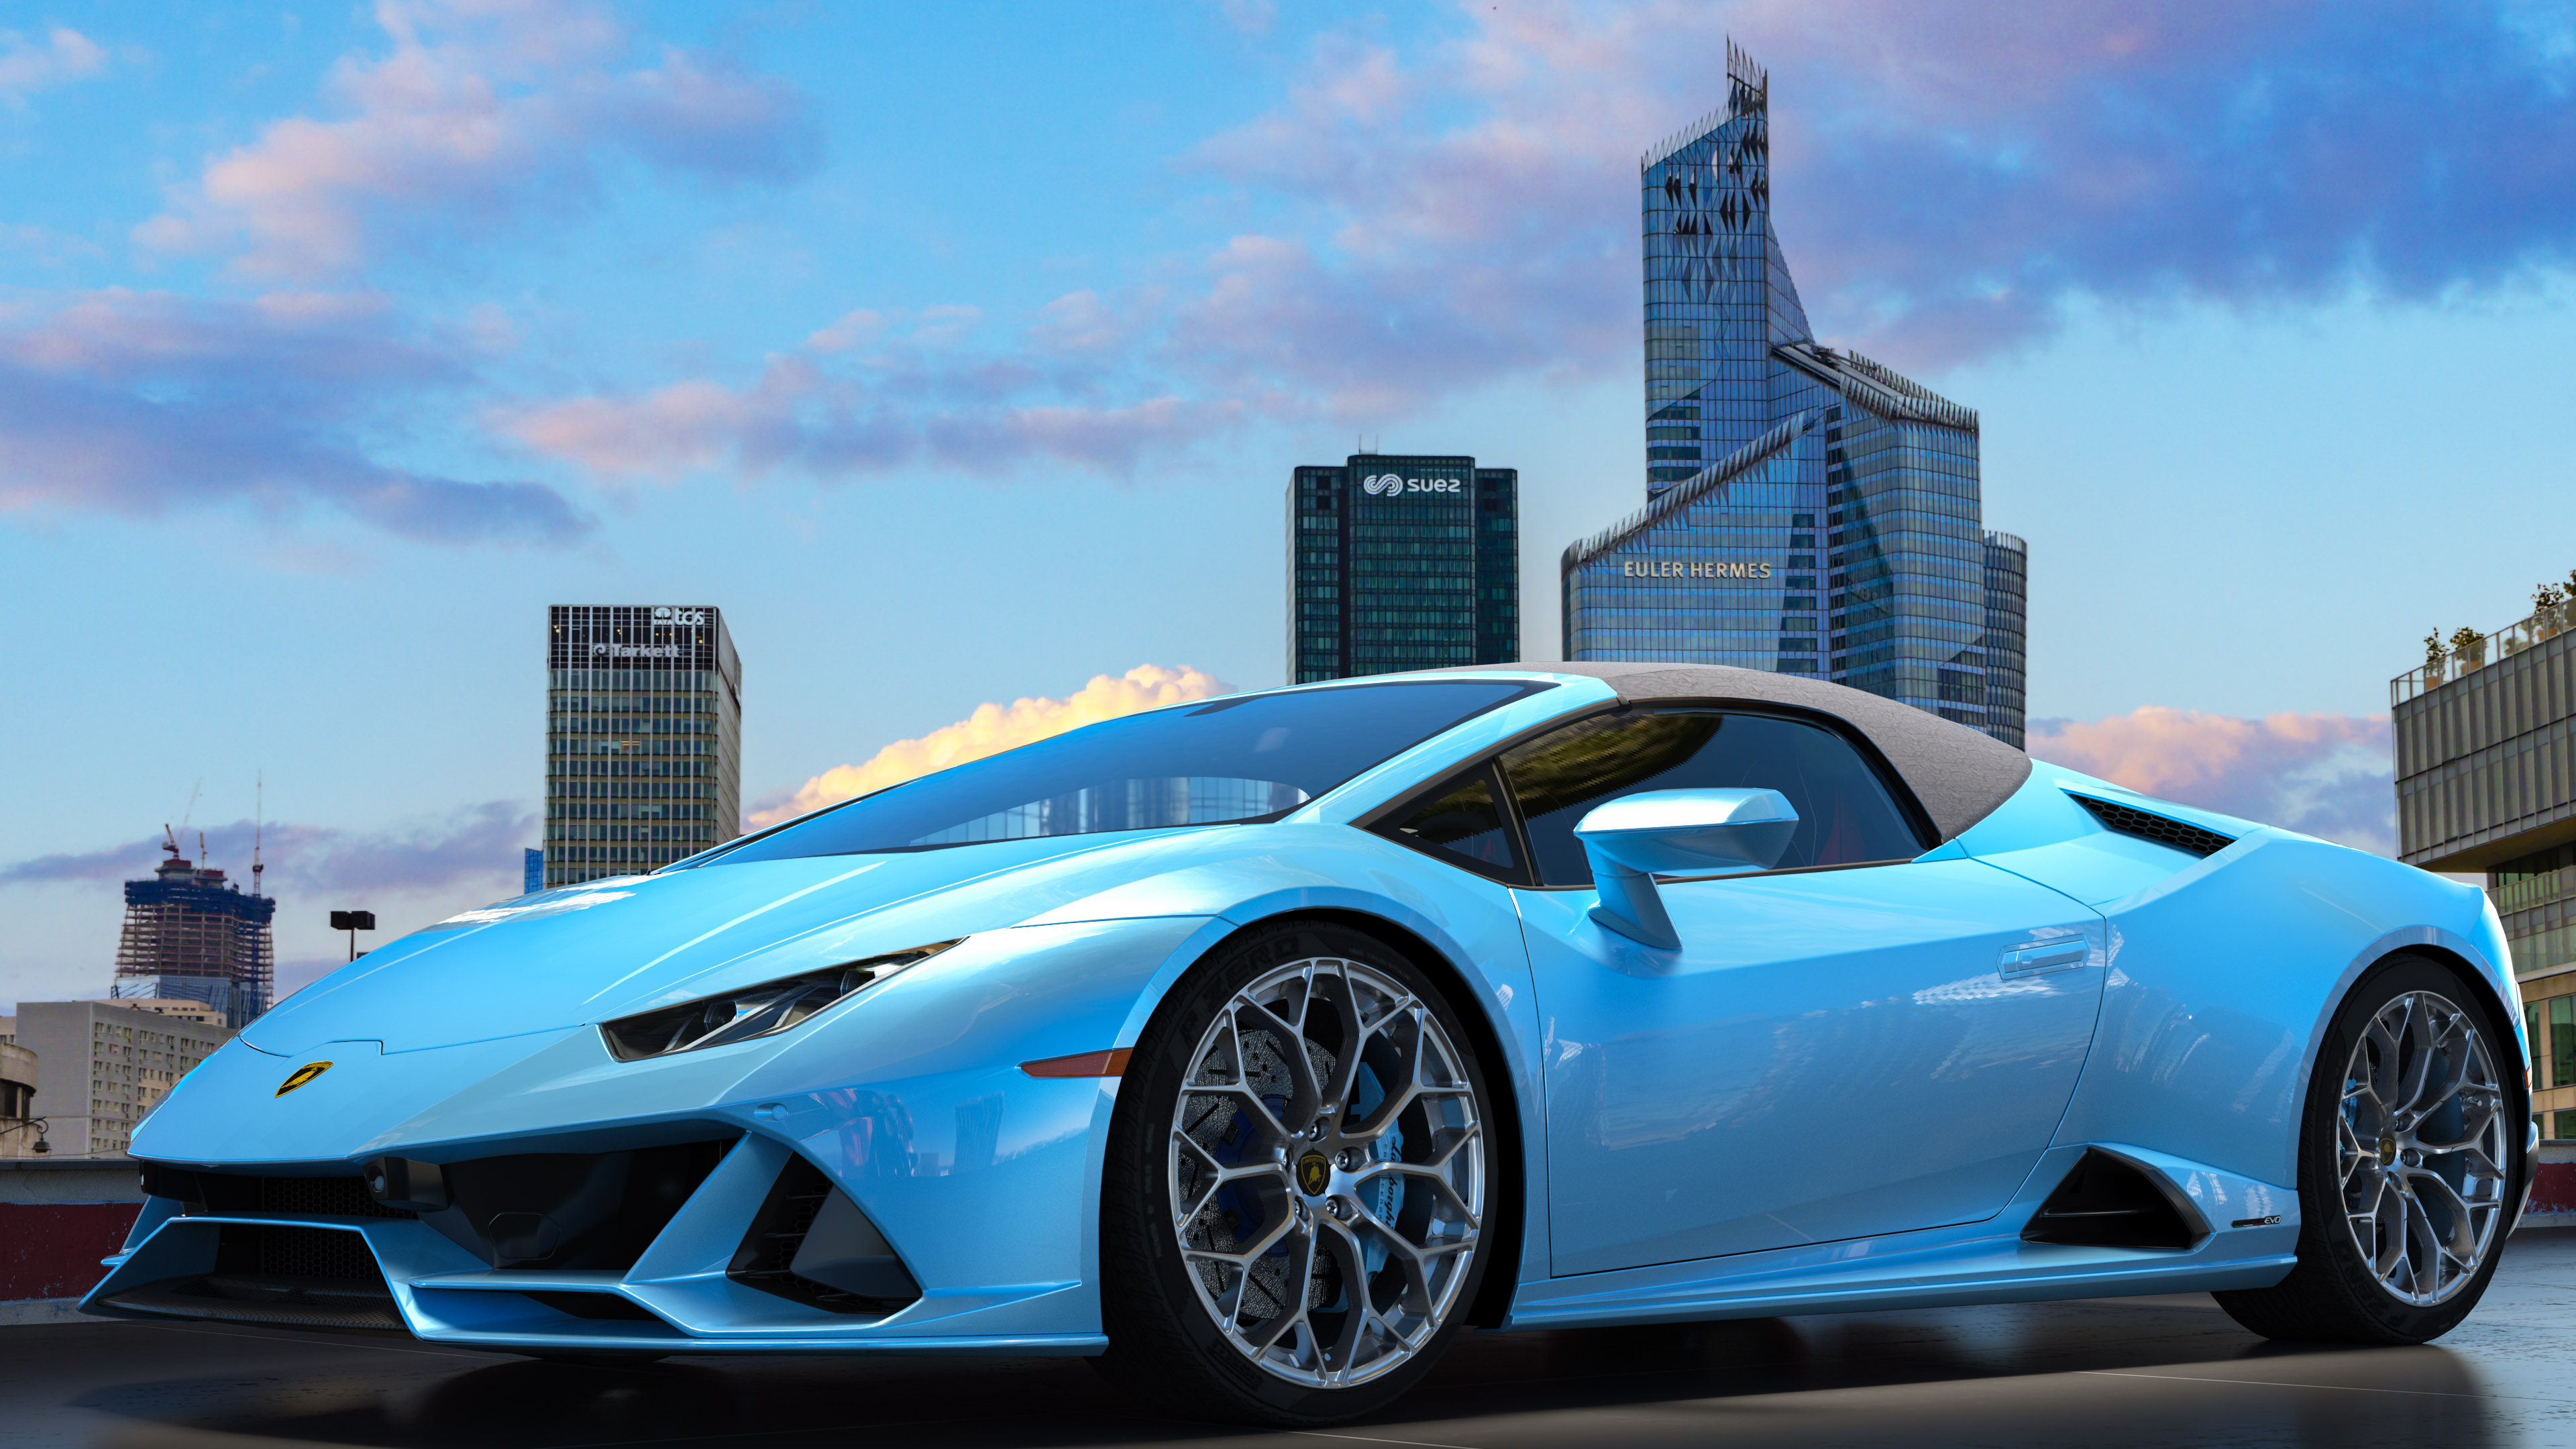 Immerse your screens in unparalleled luxury with the 4K wallpaper, featuring the Lamborghini Huracan supercar, delivering a visual spectacle that transforms your digital space effortlessly.